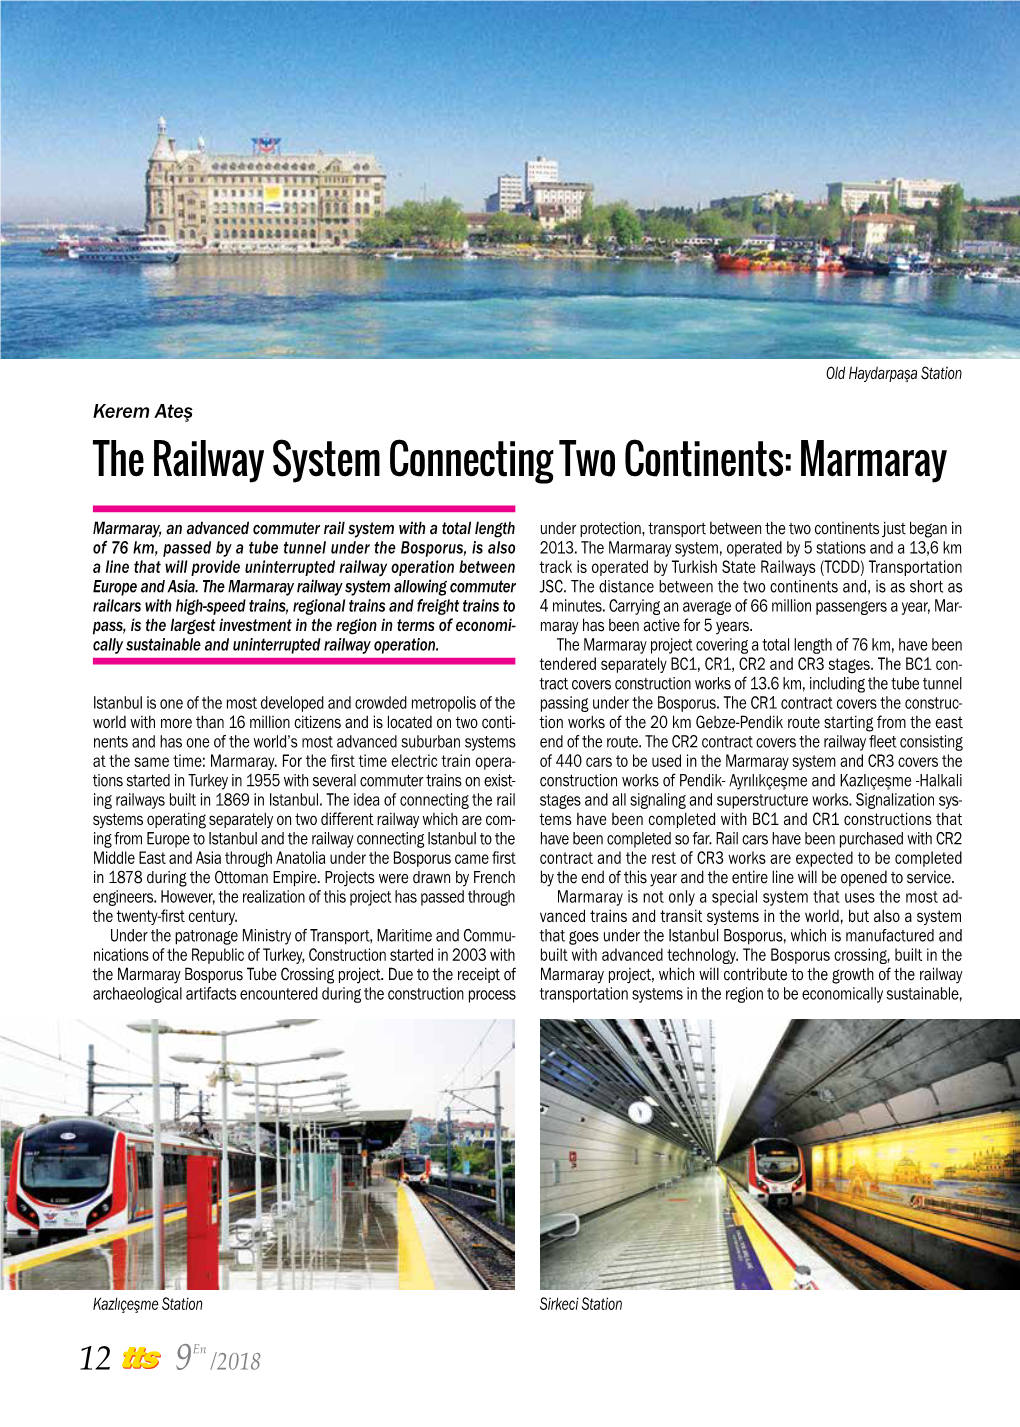 The Railway System Connecting Two Continents: Marmaray